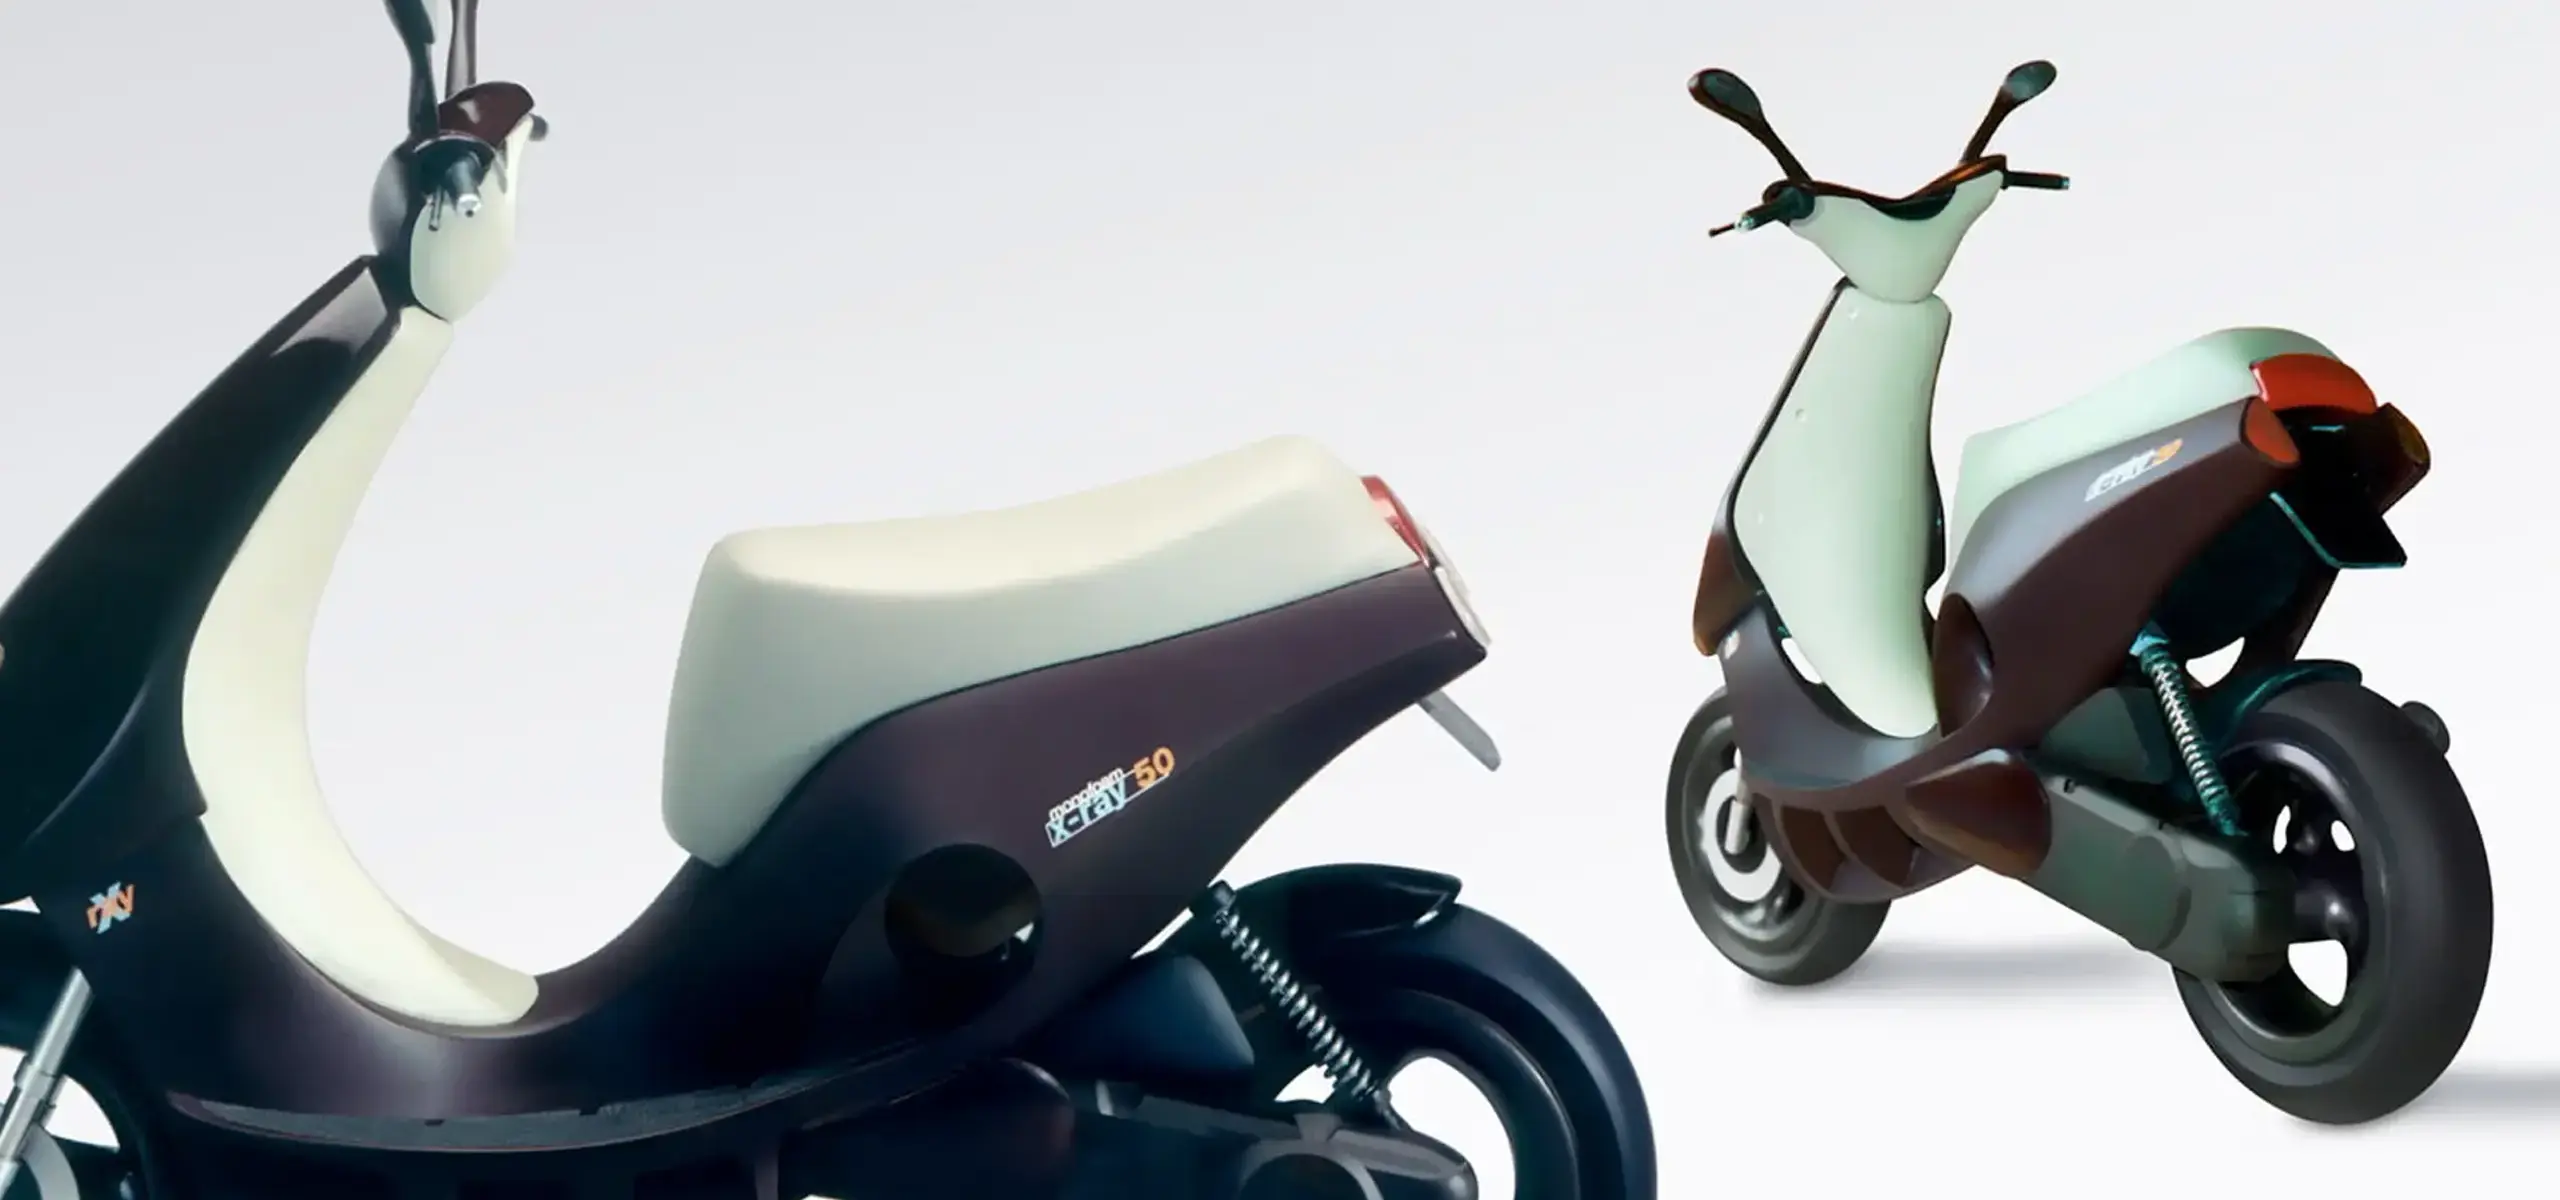 scooter design concept groen and boothman